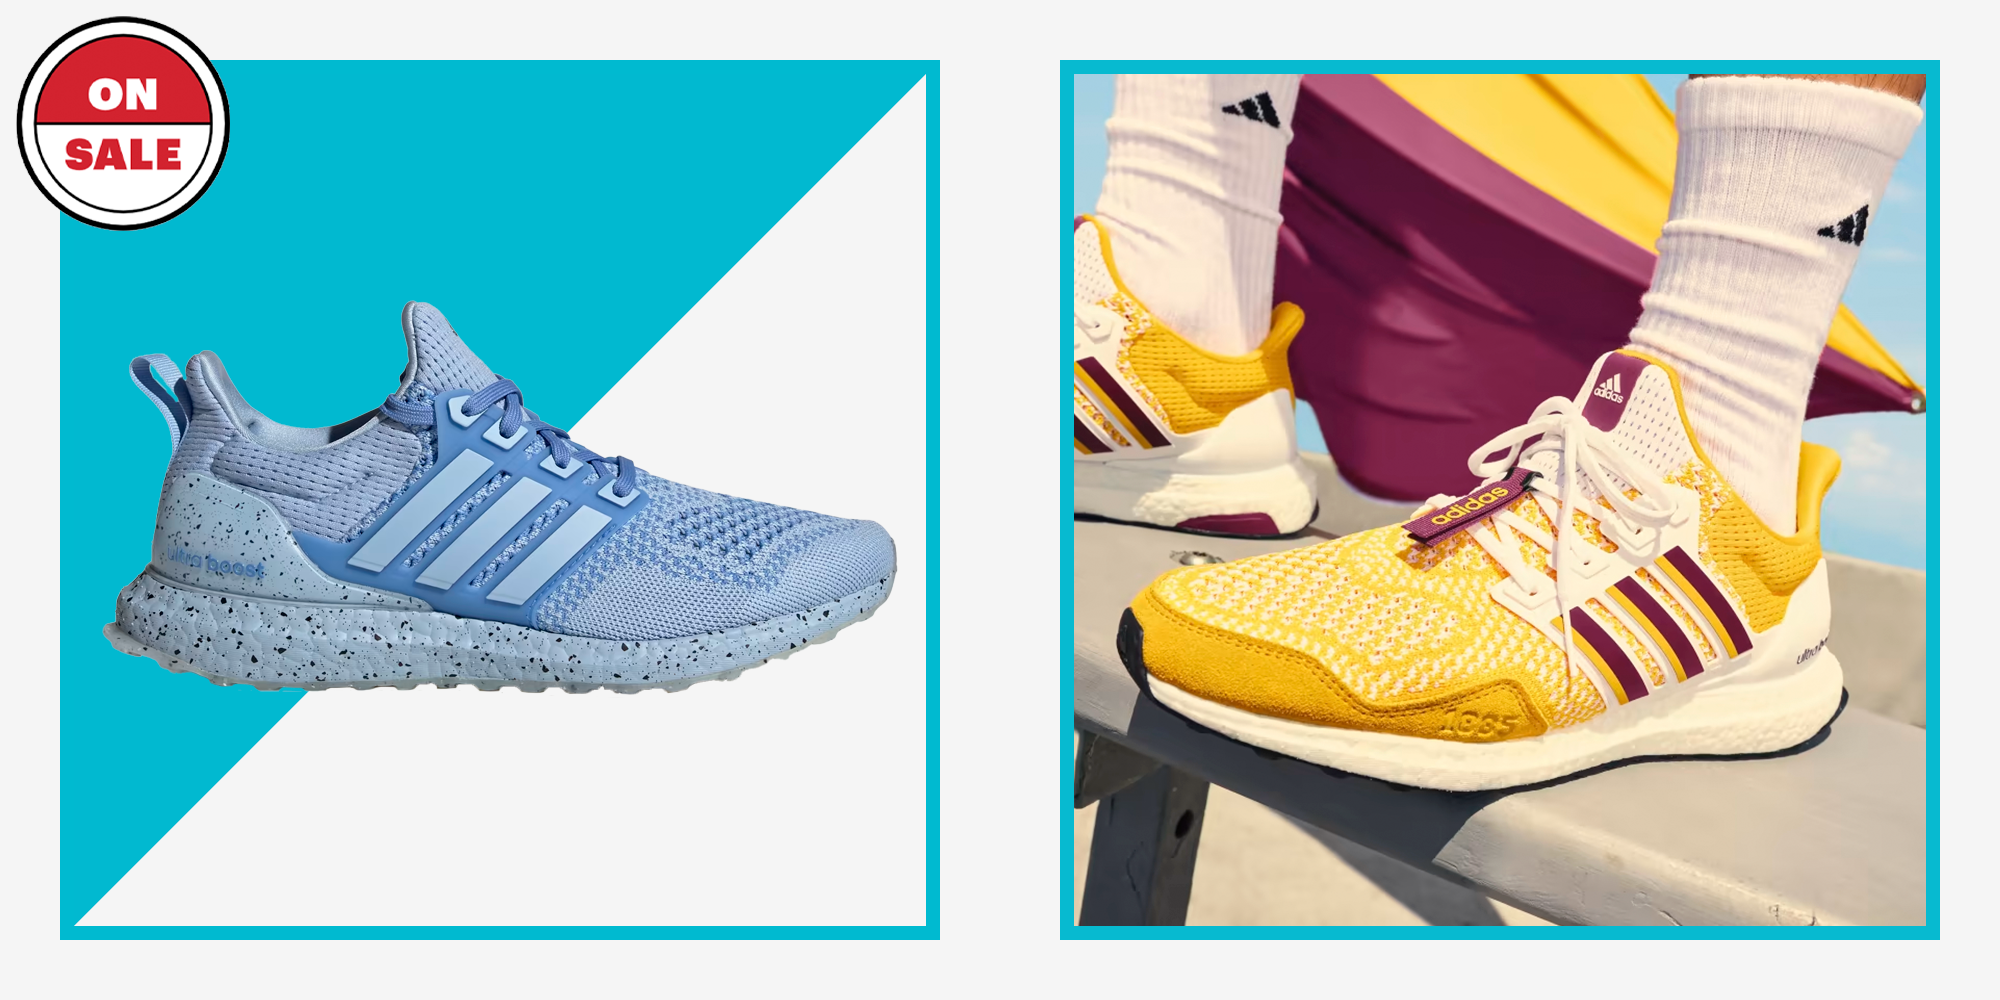 Adidas Ultraboost Sale: Take Up to 40% Off Cloud Shoes